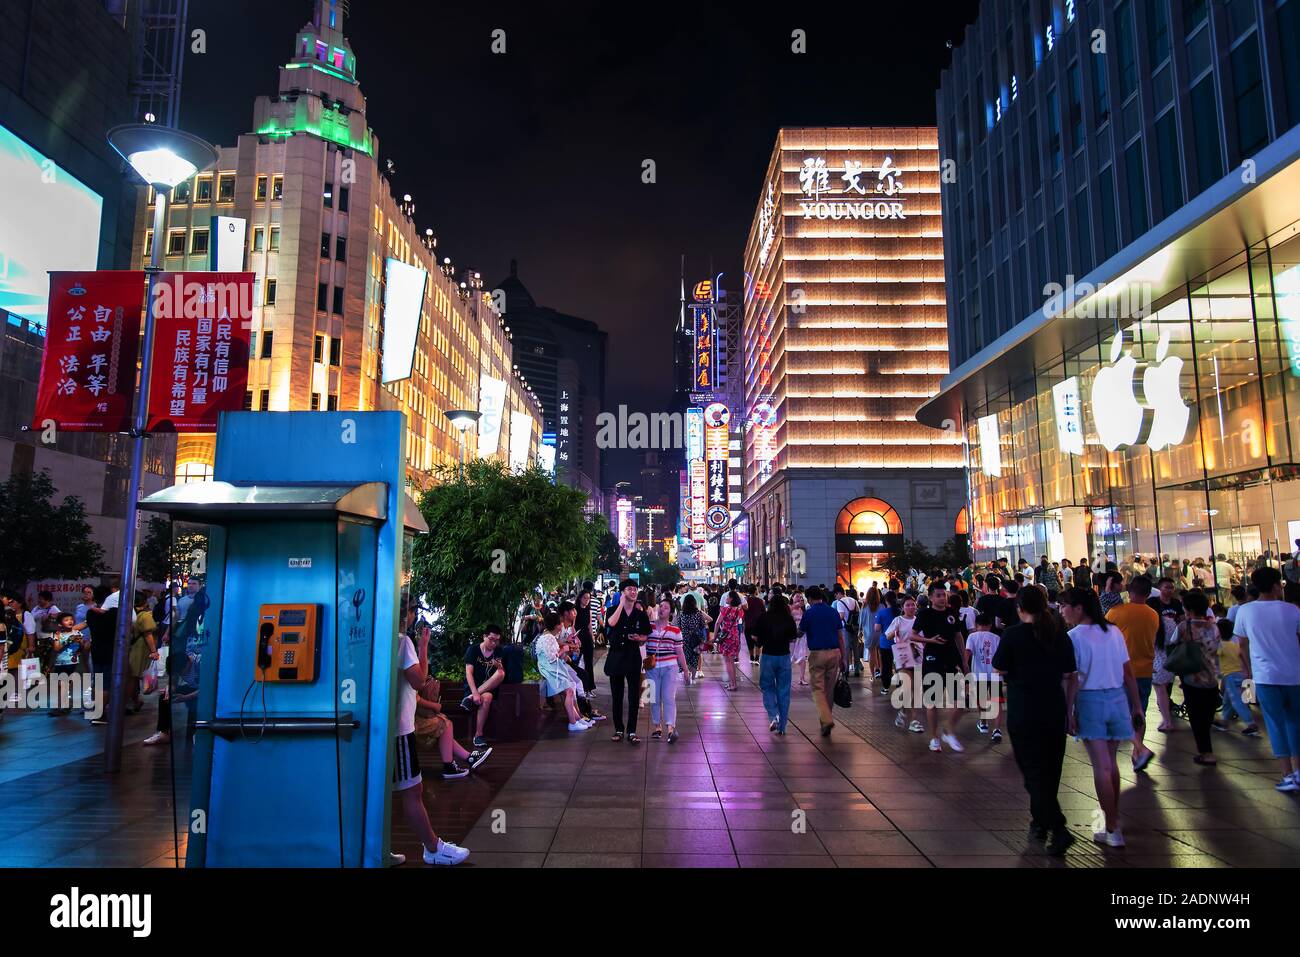 Shanghai, China - August 7, 2019: Nanjing road in downtown Shanghai with neon signs and shops and tourists walking around at night Stock Photo